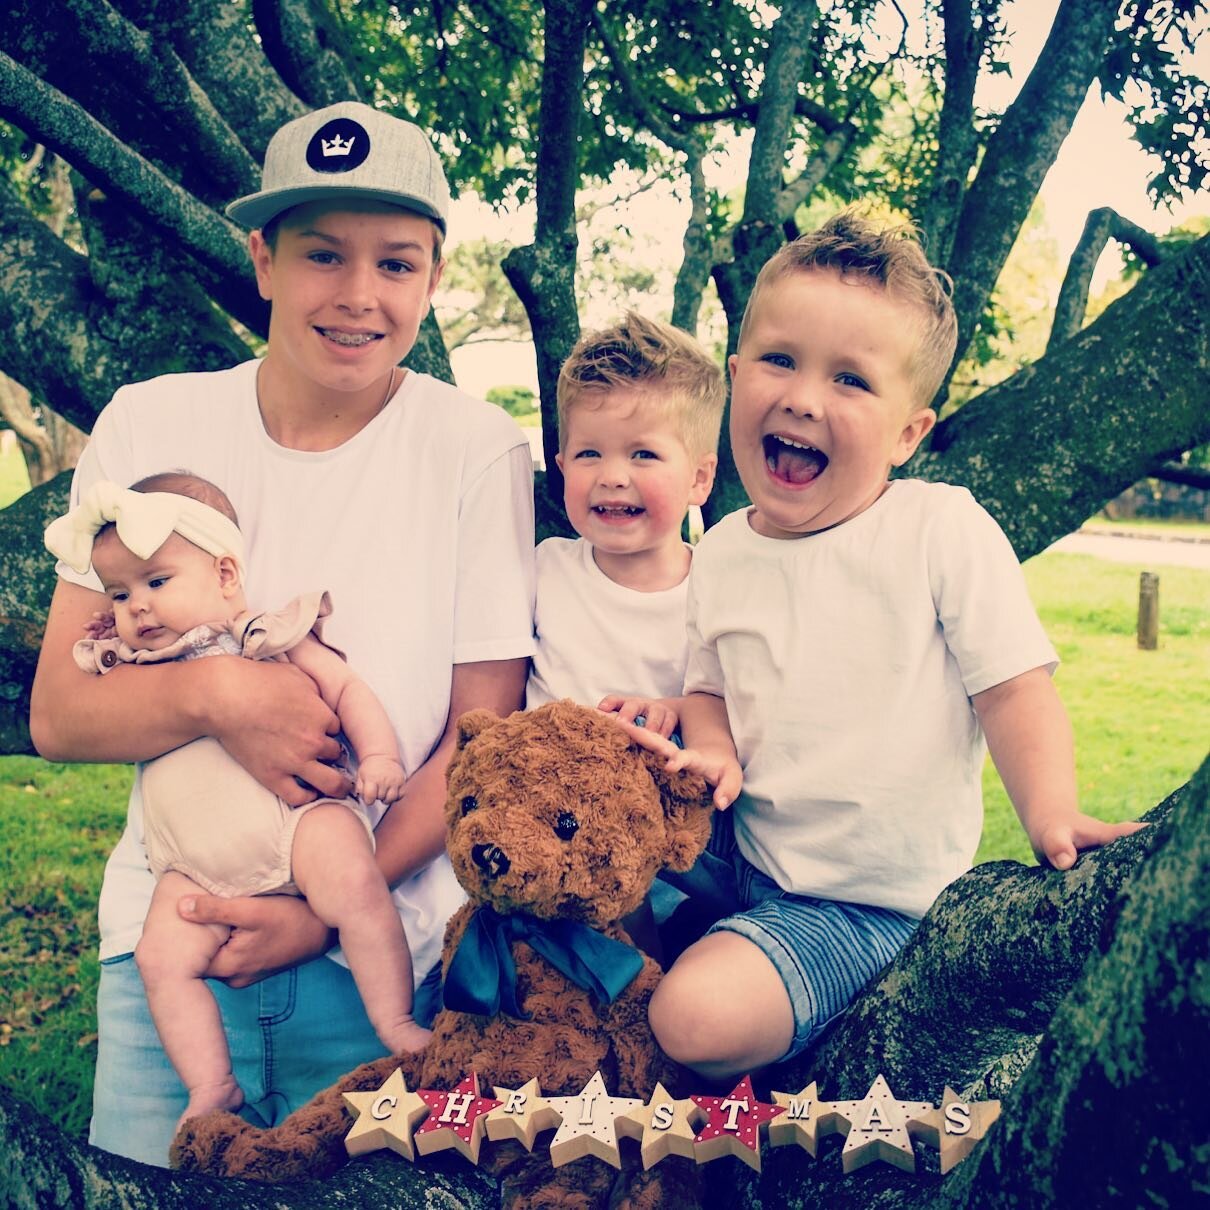 Our Noah bear is in every photo. Taking holiday photos will never feel right. It always feels like someone is missing because someone is missing.

And yet my children deserve tradition &amp; fun &amp; holiday photos. 

So Noah bear hops on the tree w